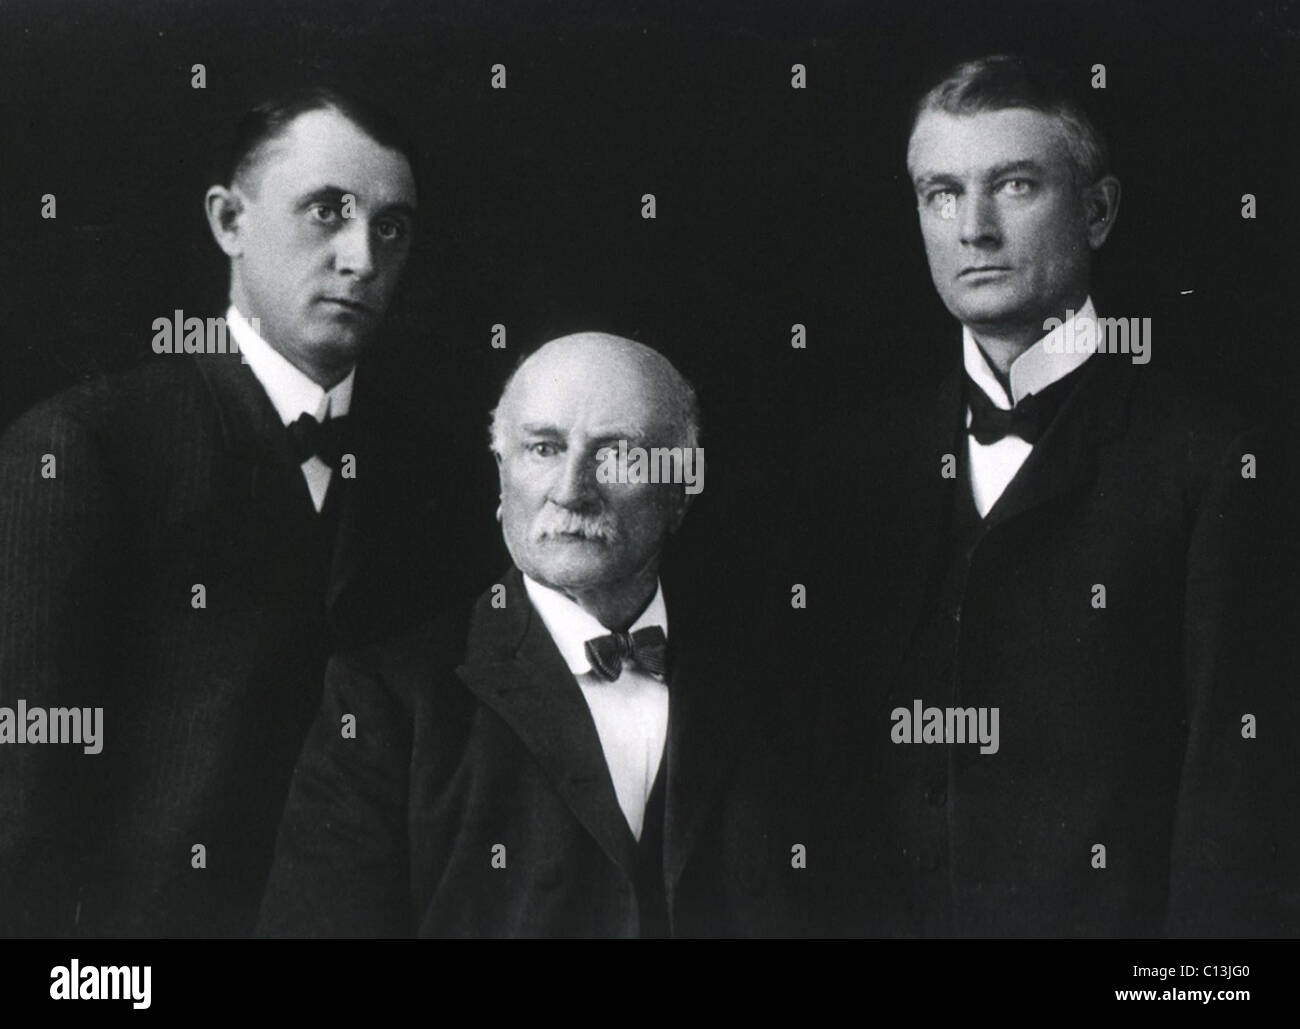 Mayo family portrait, ca. 1900. From left: Charles Horace Mayo (1865-1939), William Worrall Mayo (1819-1911) and William James Mayo (1861-1939).William Worrall Mayo emigrated to the U.S. from England in 1845 and established a surgical practice in Rochester, Minnesota in 1863. His sons joined his practice and founded the Mayo Clinic in 1905. Stock Photo